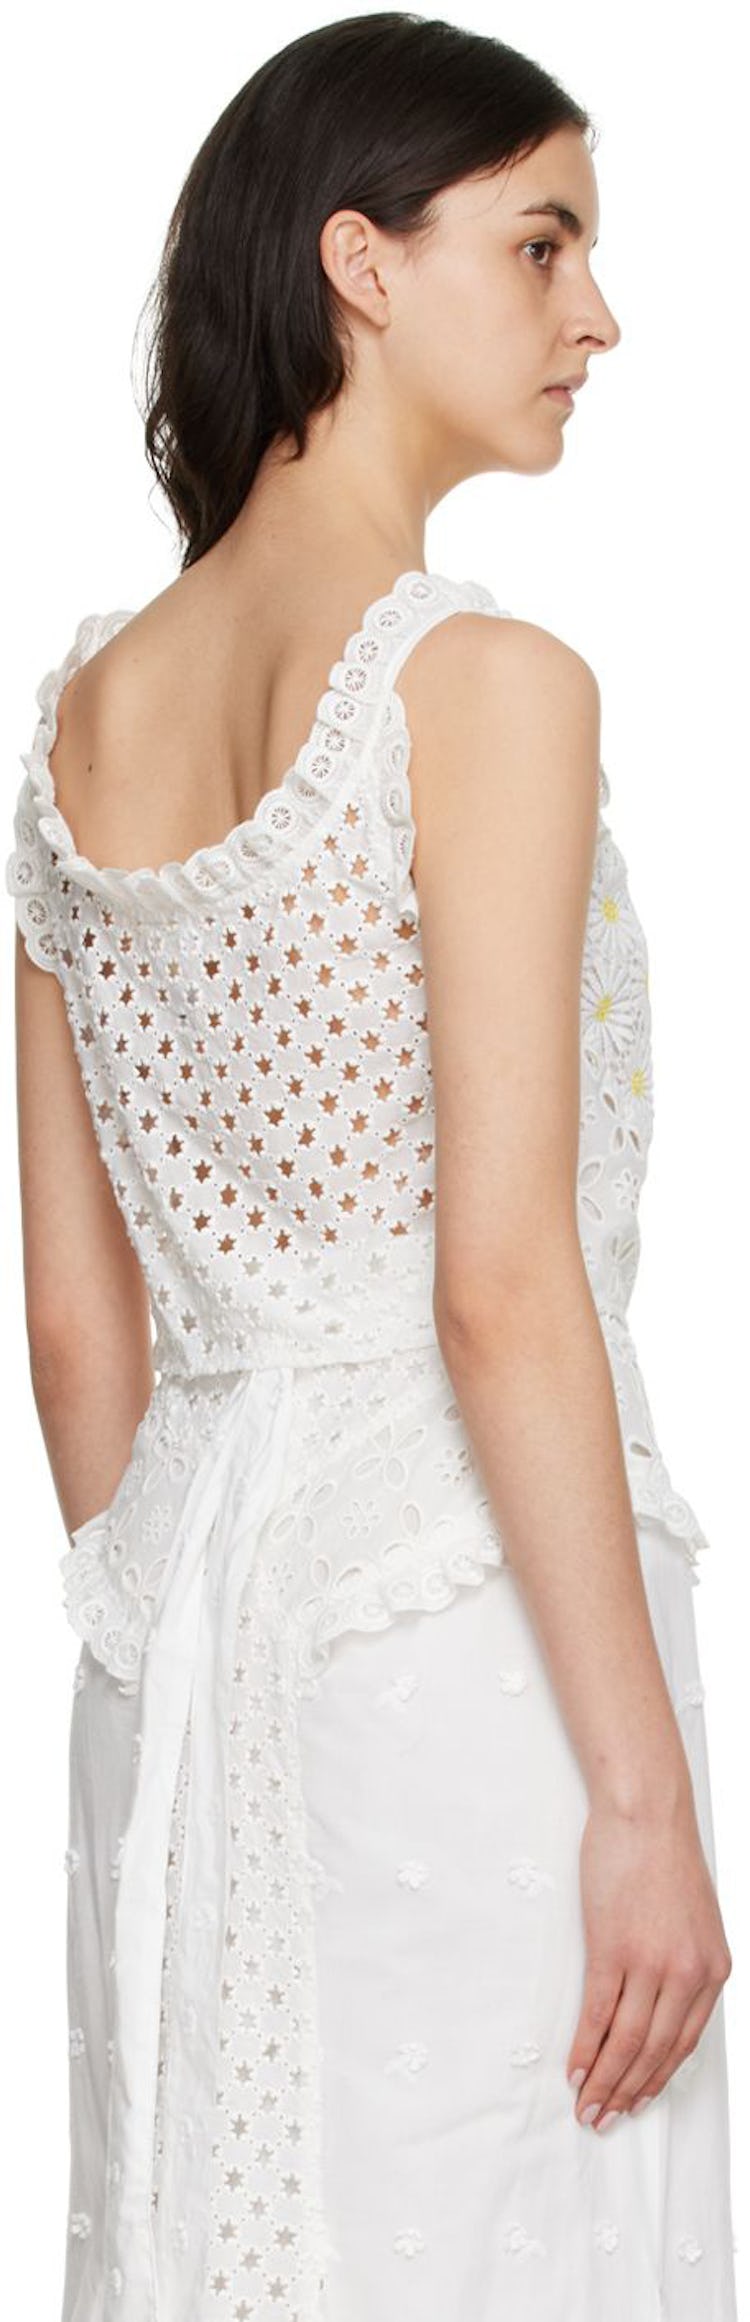 White Daisy Tank Top: additional image